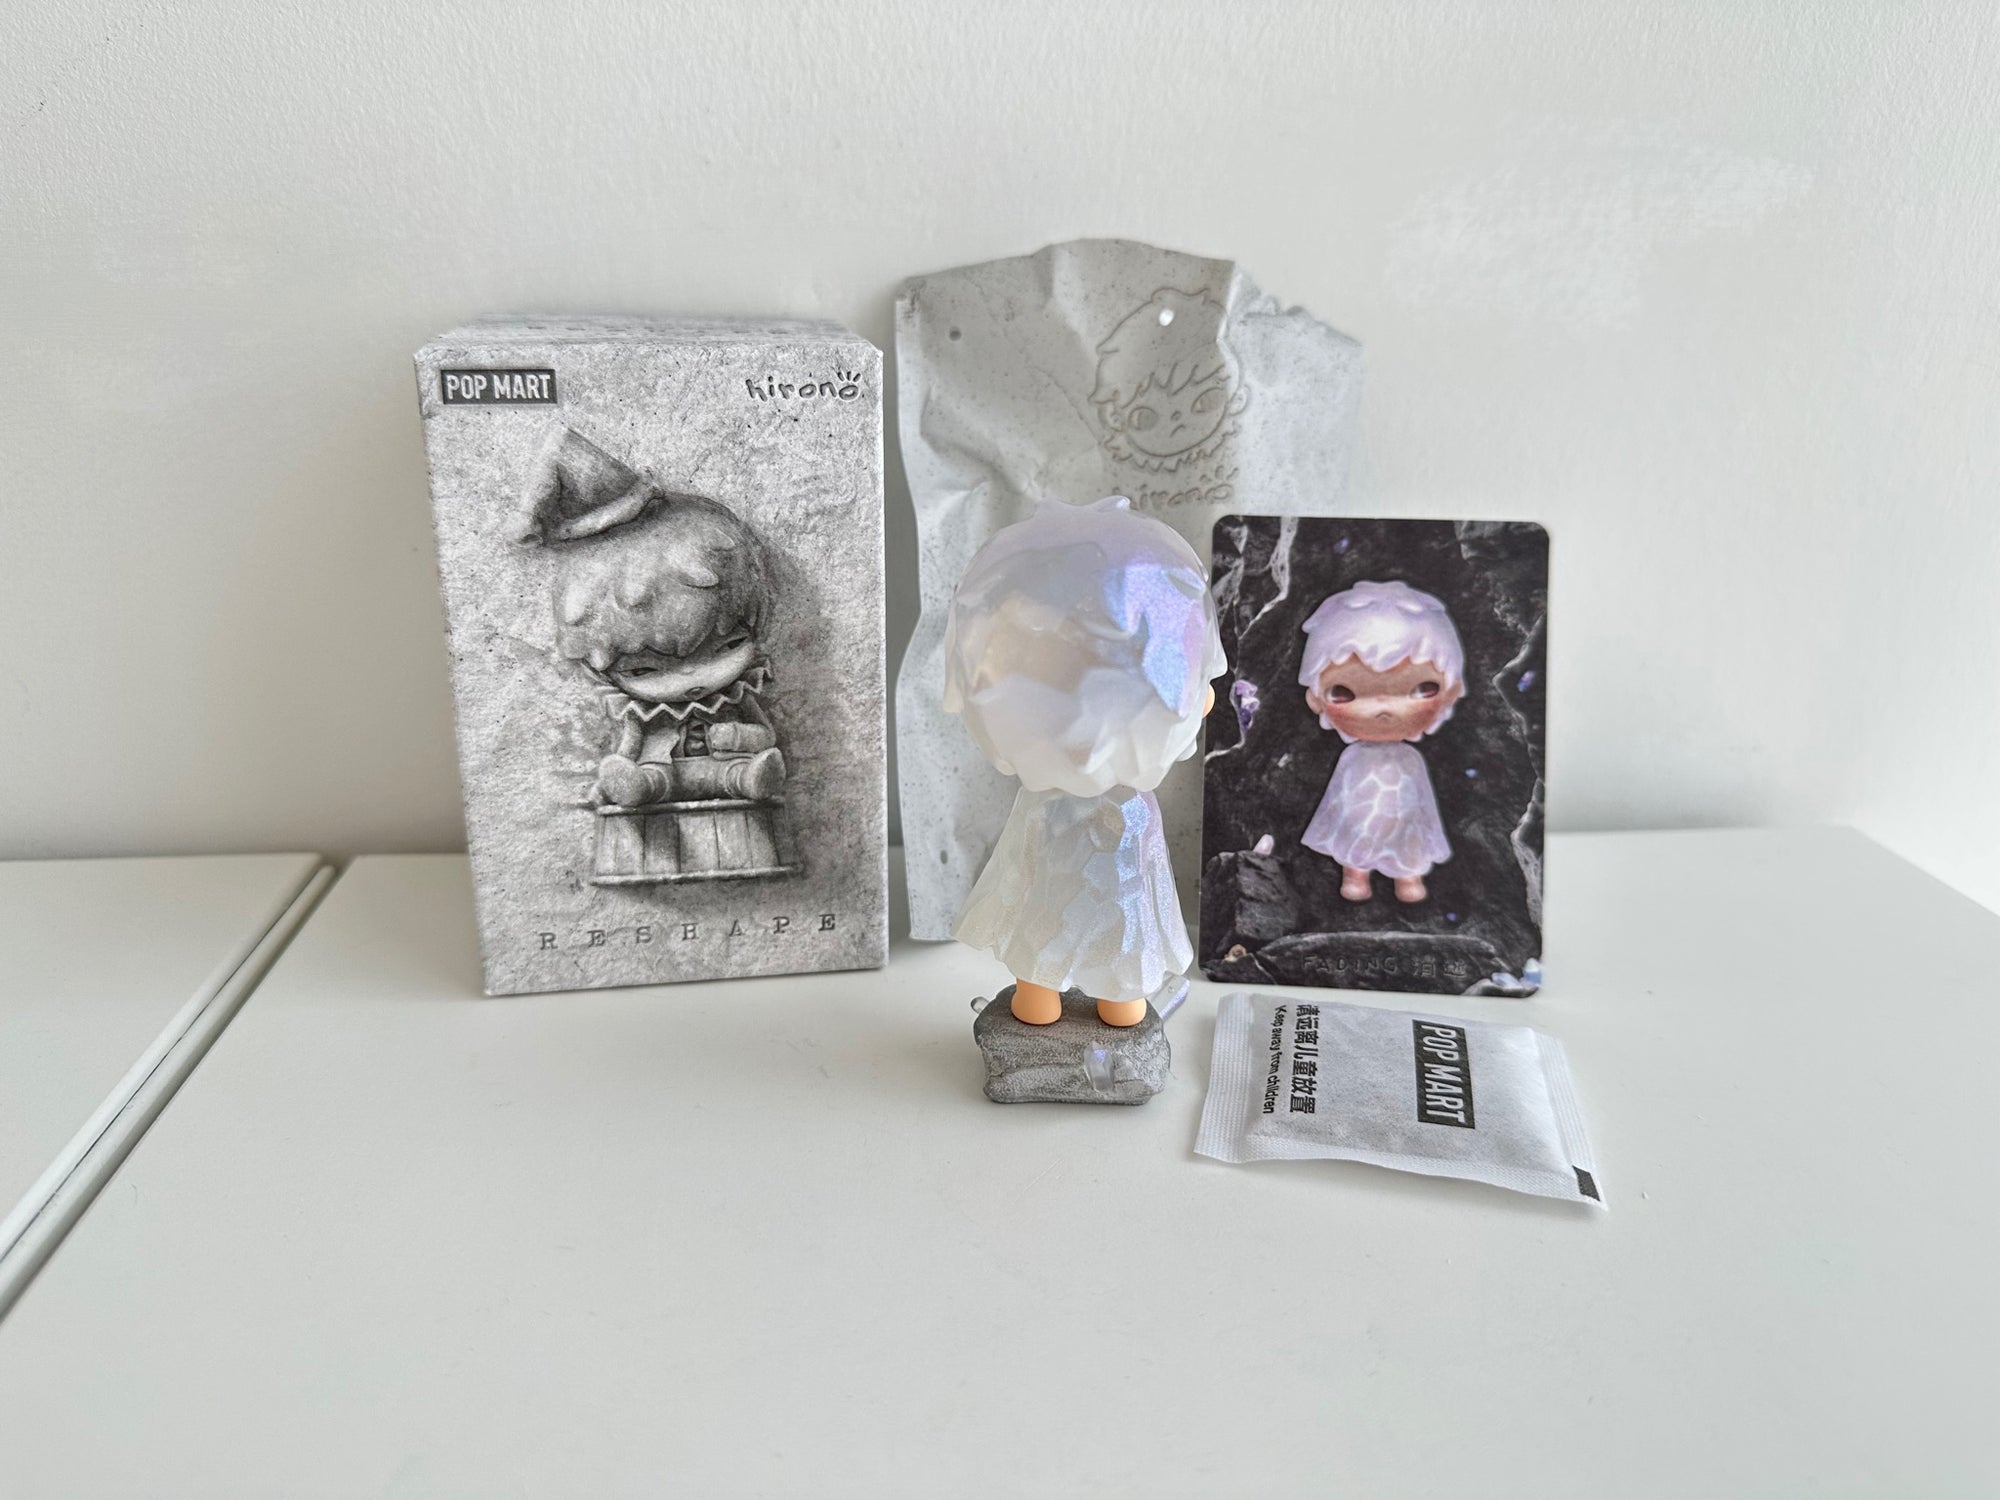 Fading - Hirono Reshape Series Figures Blind Box by POP MART - 1